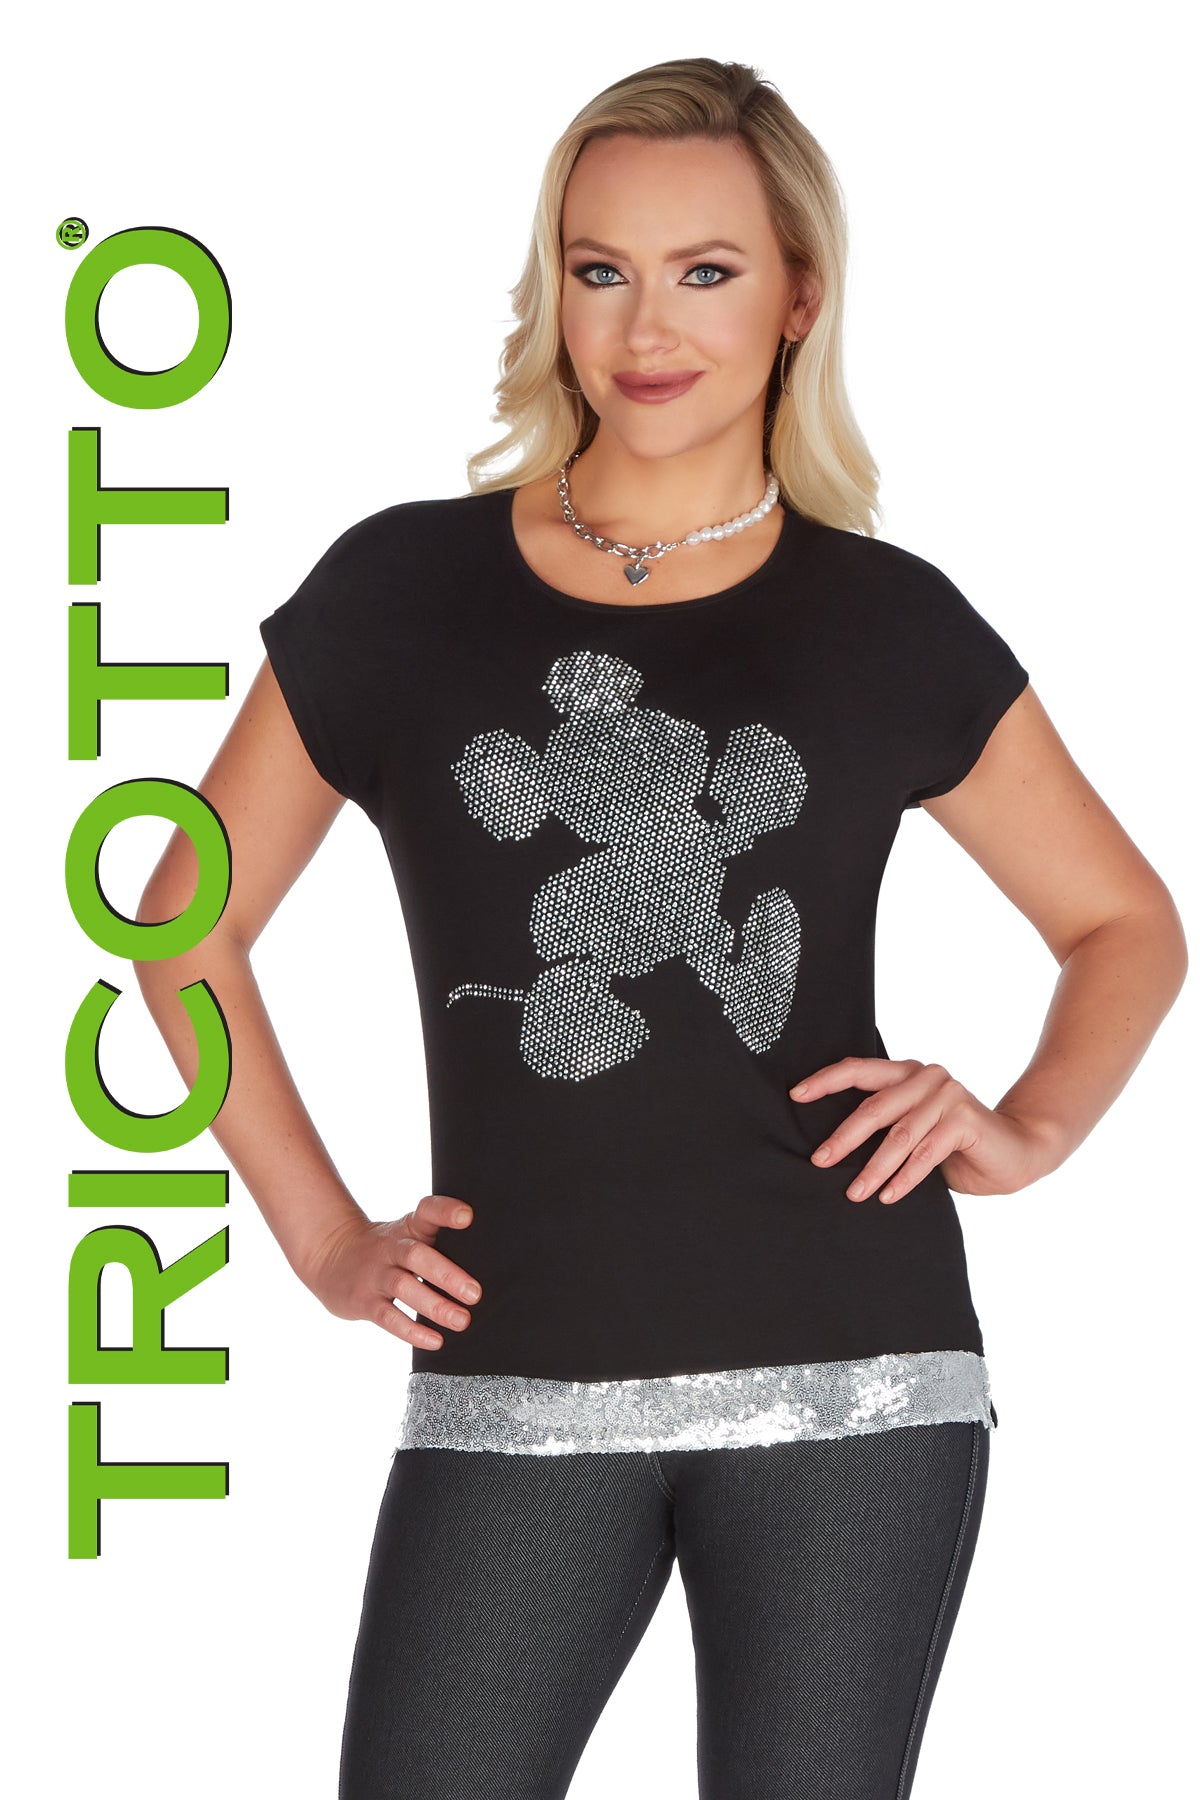 Tricotto T-shirts-Buy Tricotto T-shirts Online Canada-Tricotto Spring 2022-Tricotto Clothing Montreal-Tricotto Clothing Quebec-Jane & John Clothing-Tricotto Online Shop